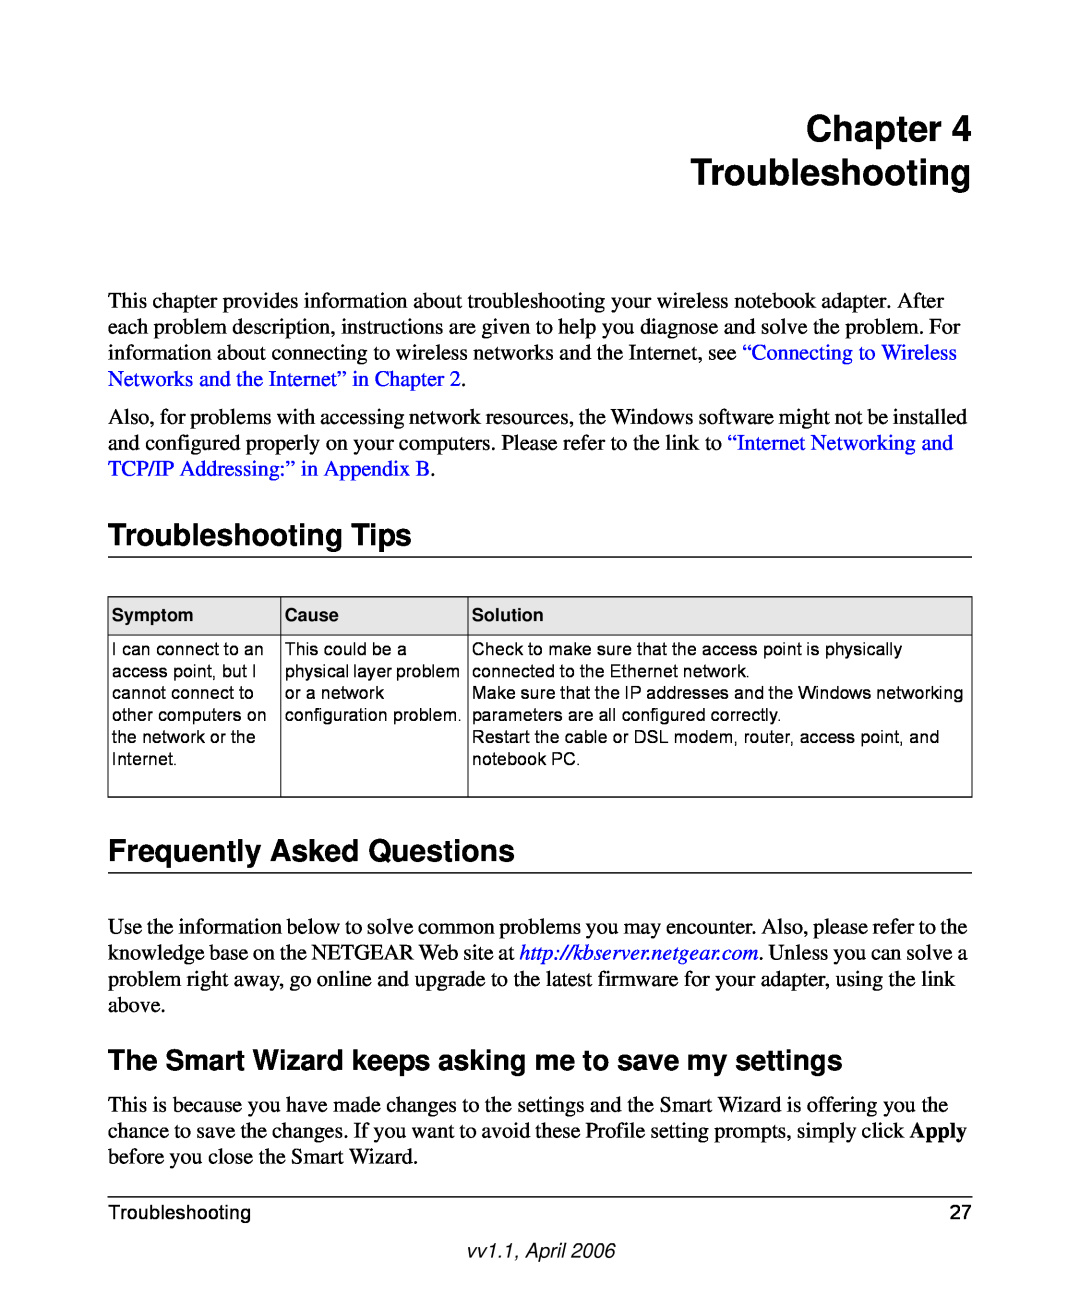 NETGEAR WN511T user manual Chapter Troubleshooting, Troubleshooting Tips, Frequently Asked Questions 